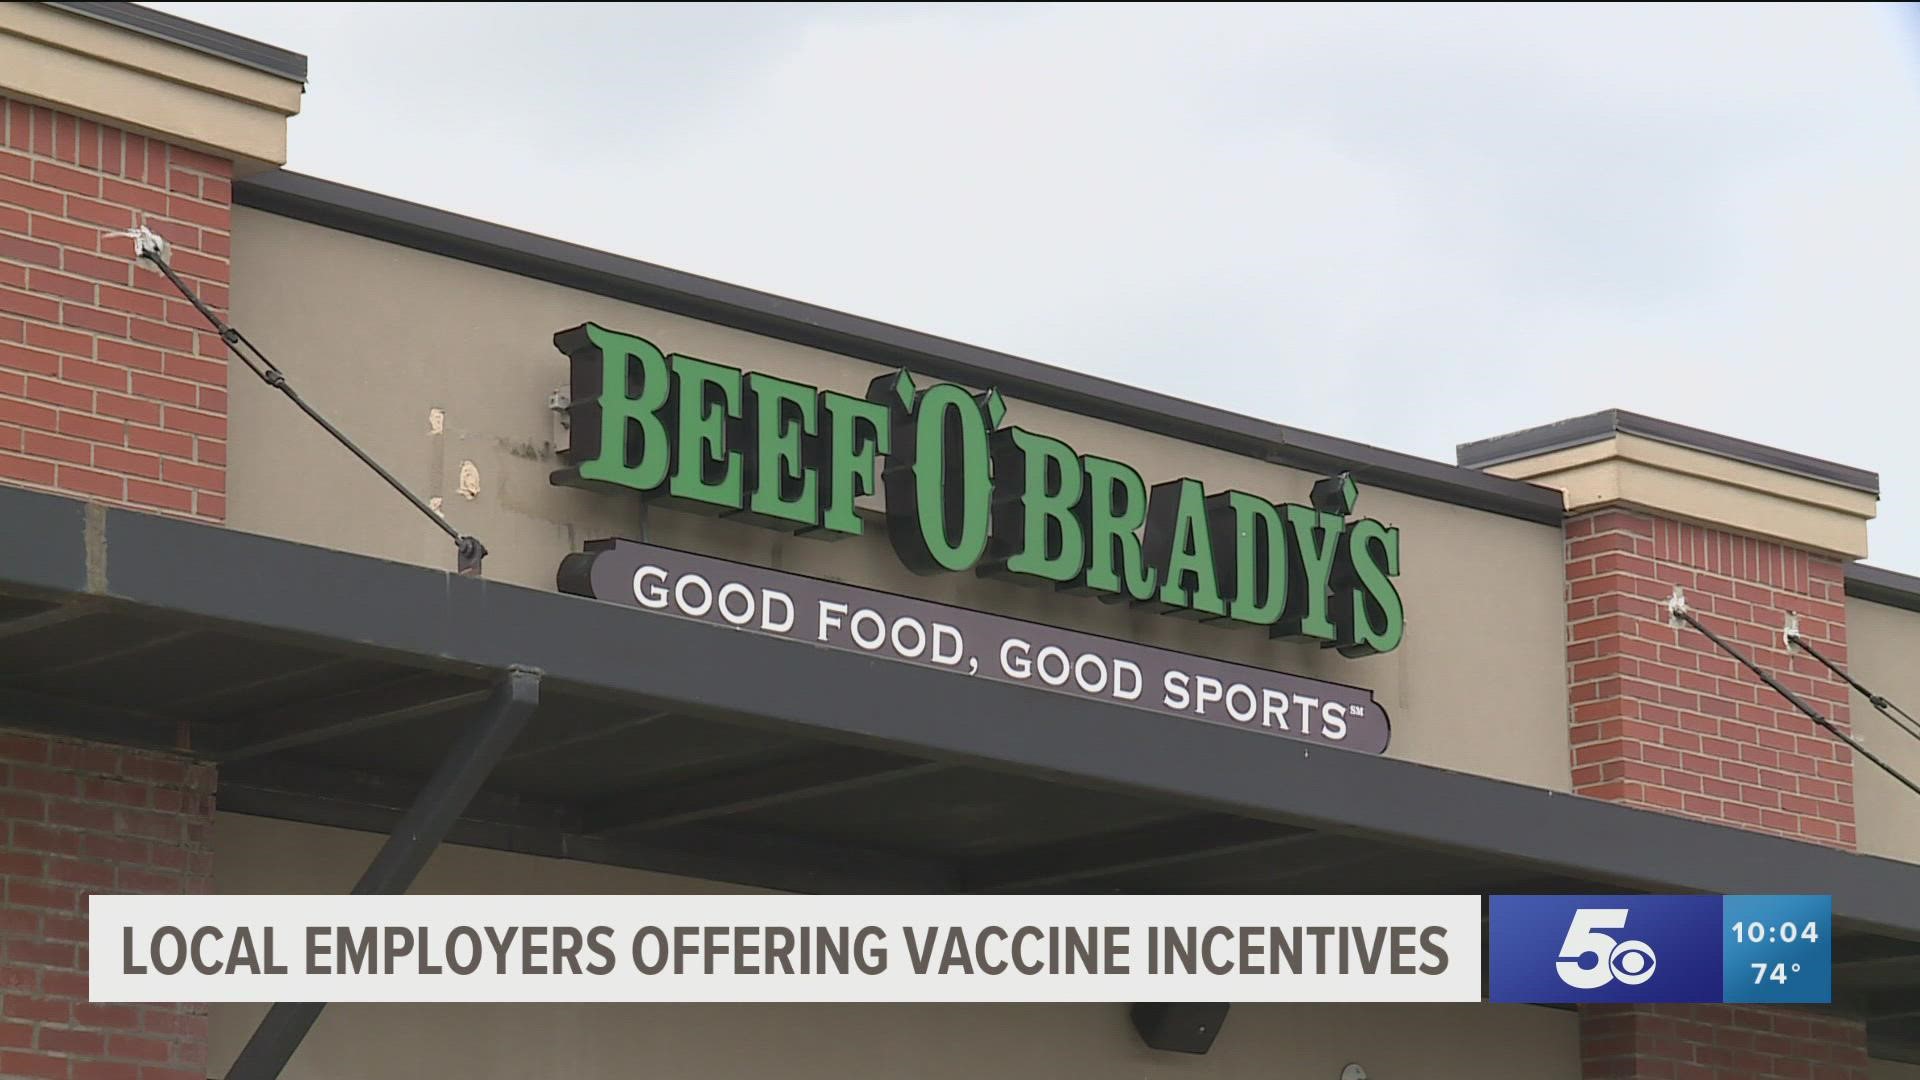 A local business is offering vaccine information and incentives to employees as Arkansas vaccination rates continue.